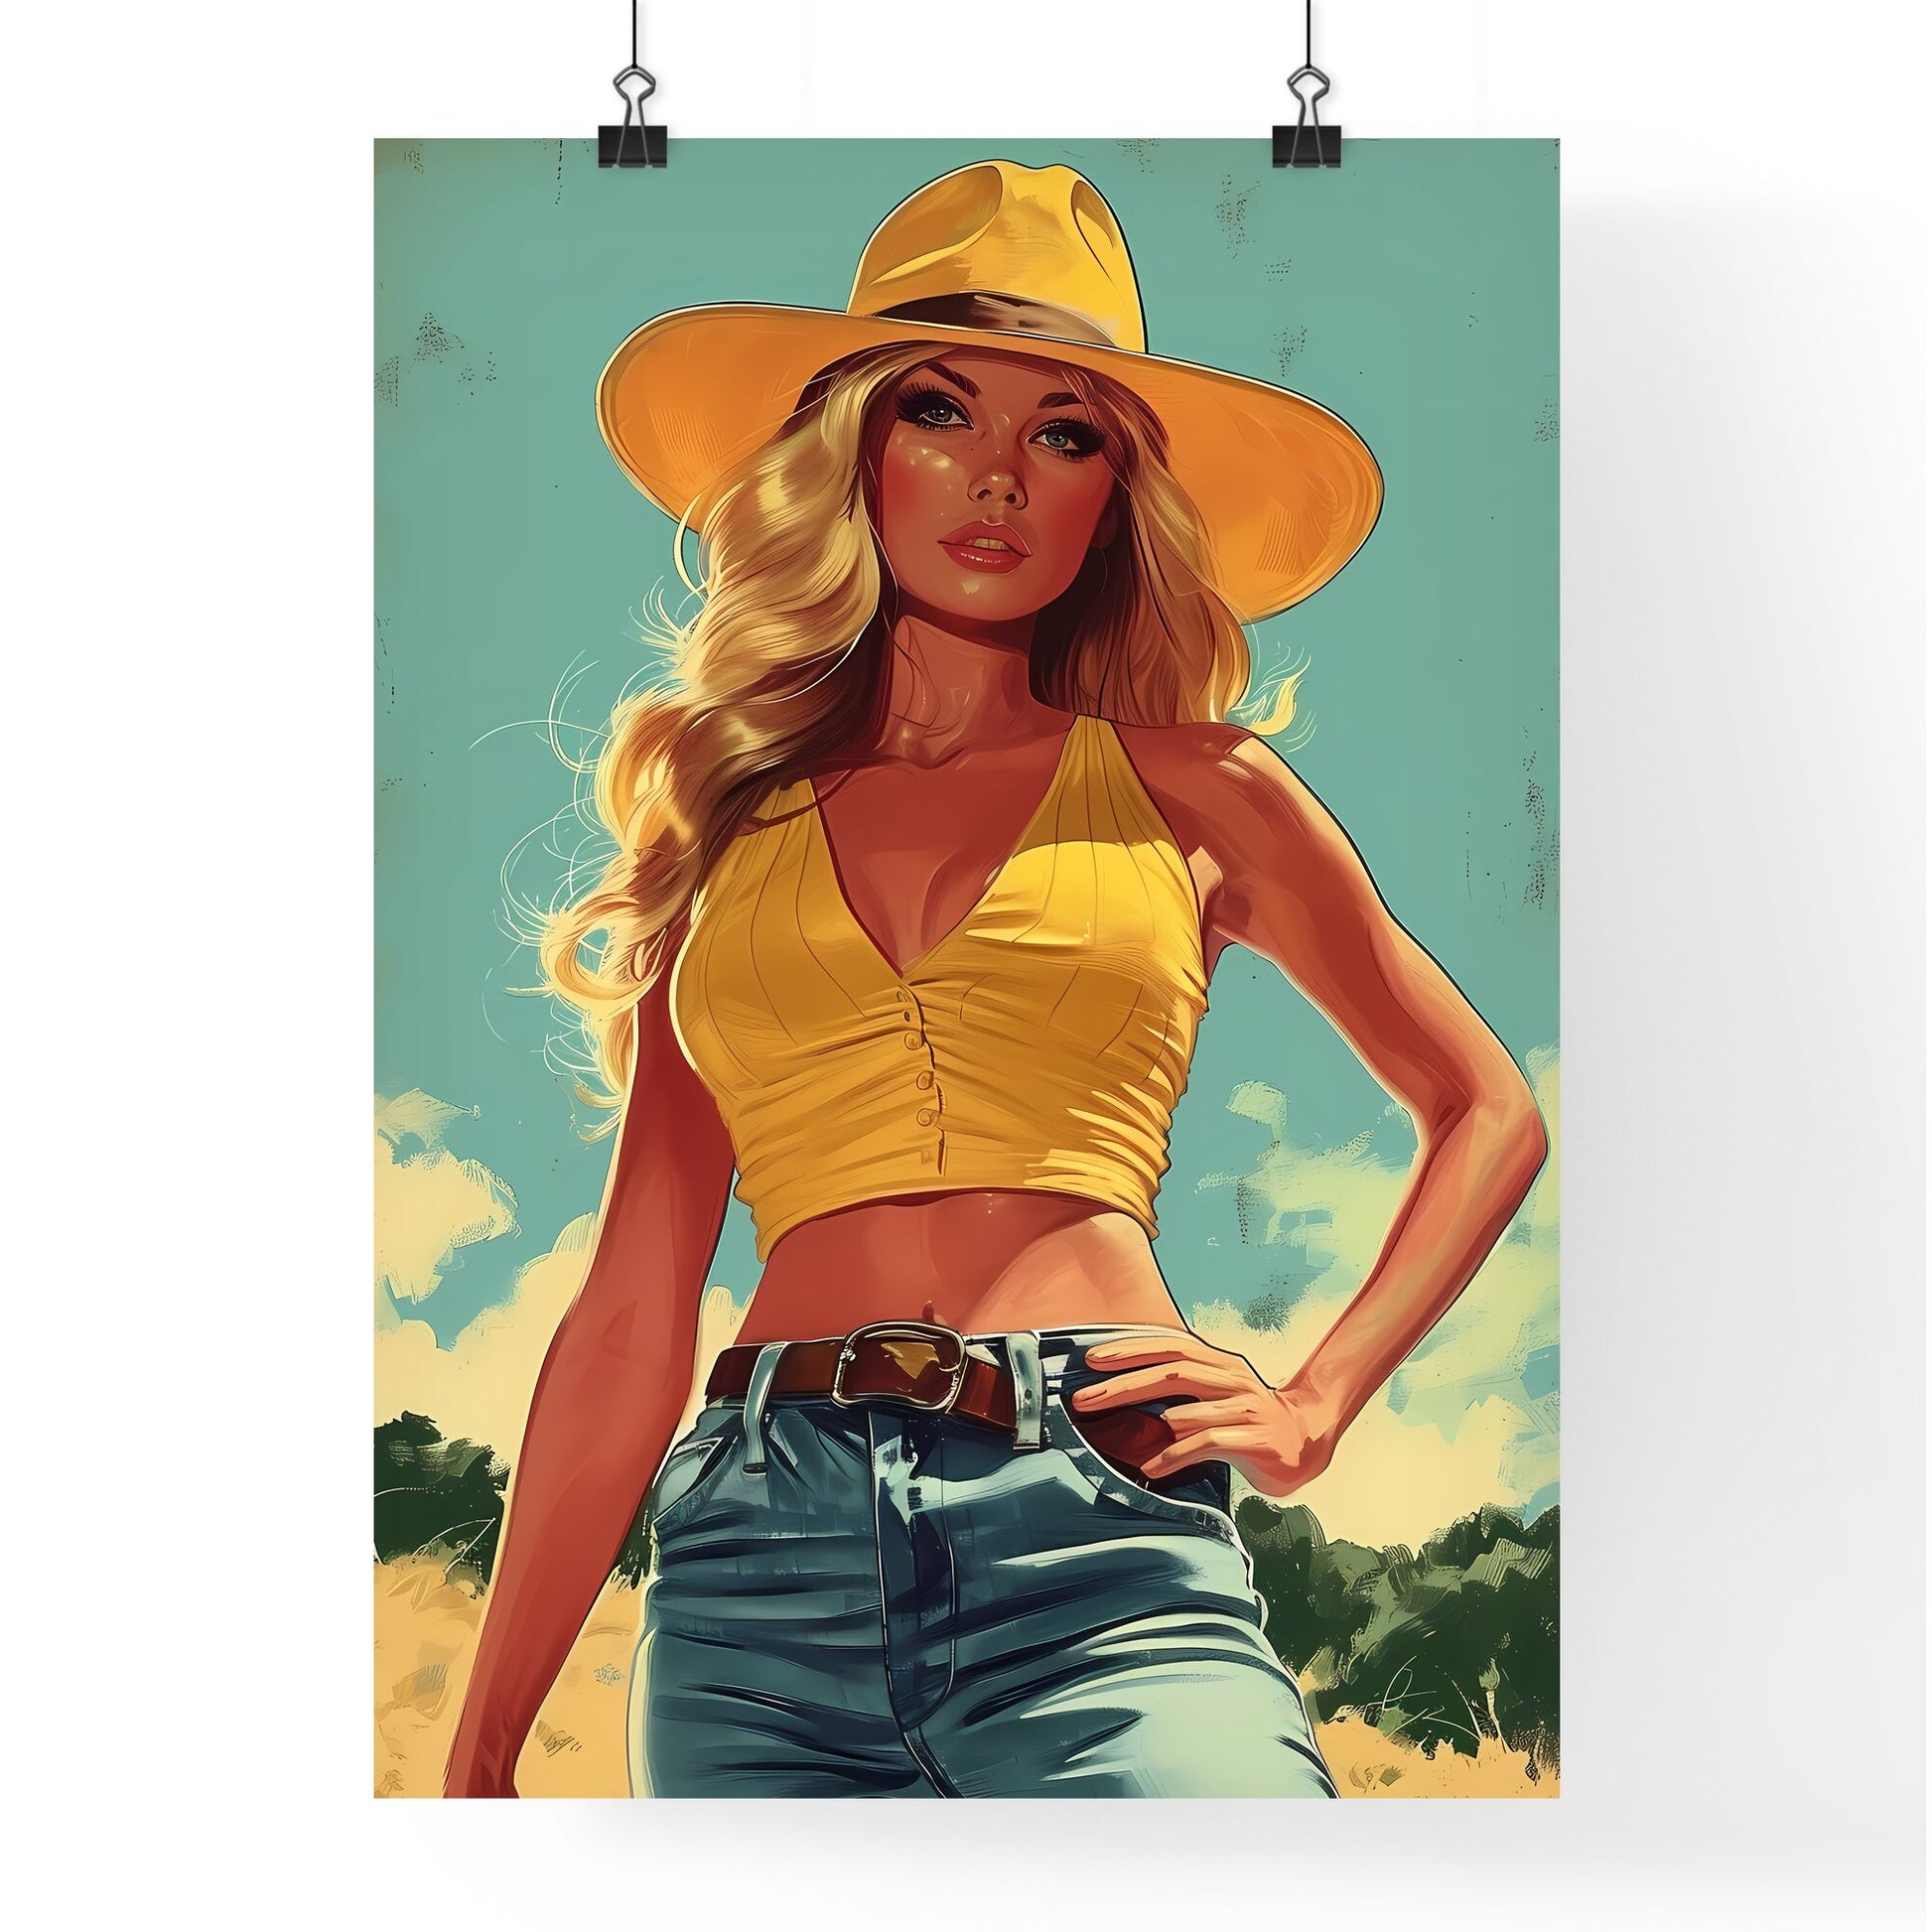 Vintage hipster woman - Art print of a woman wearing a hat and shorts Default Title